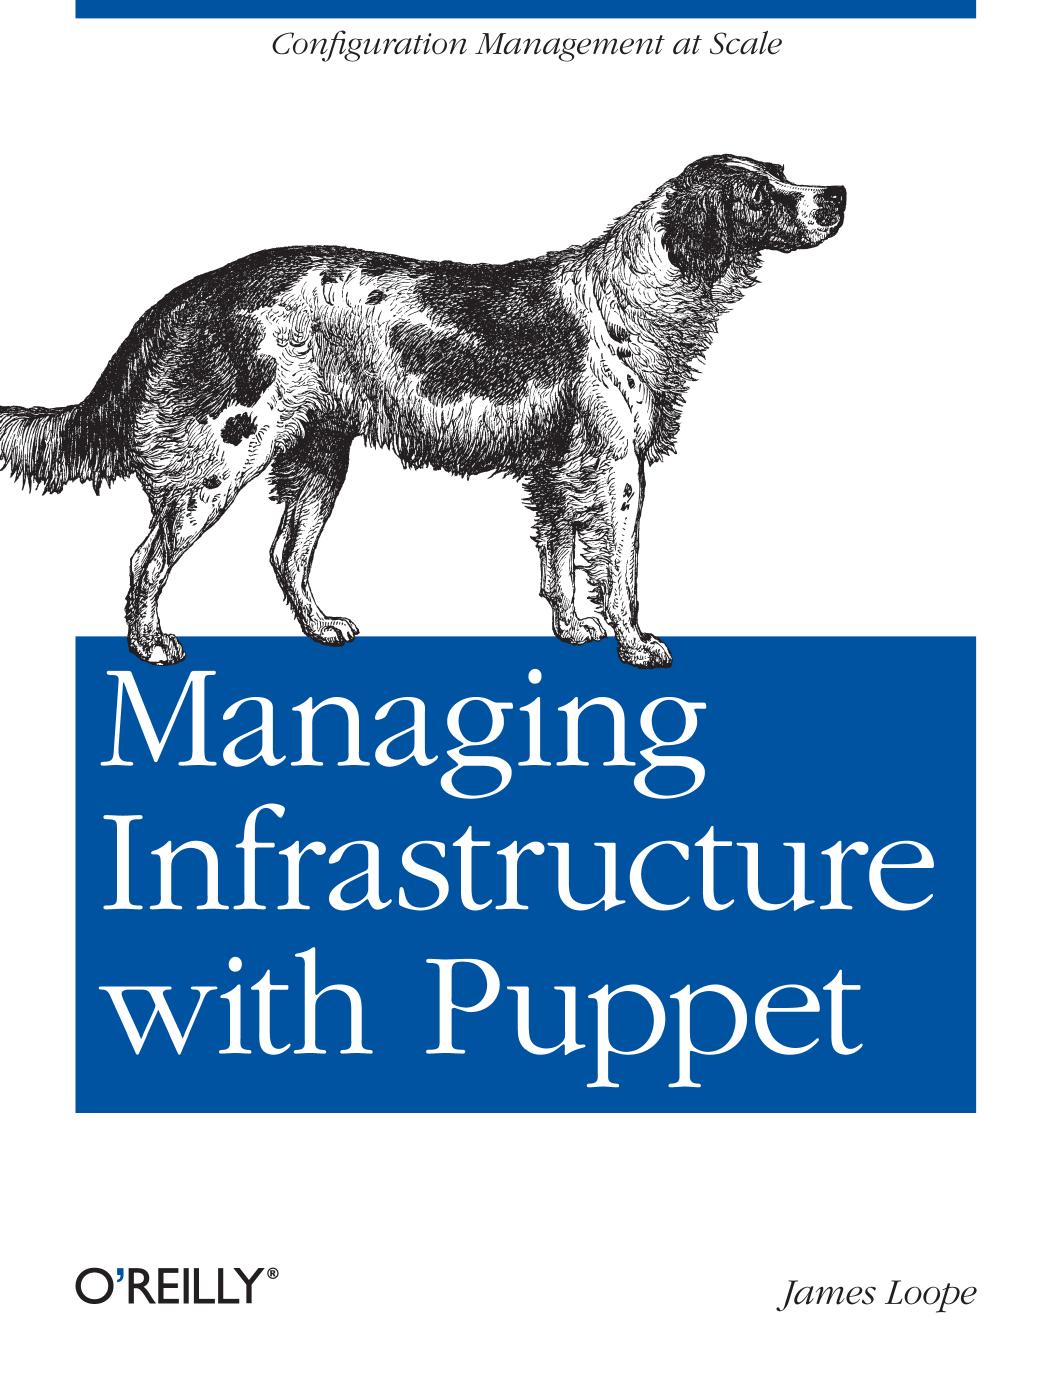 Managing Infrastructure with Puppet by James Loope